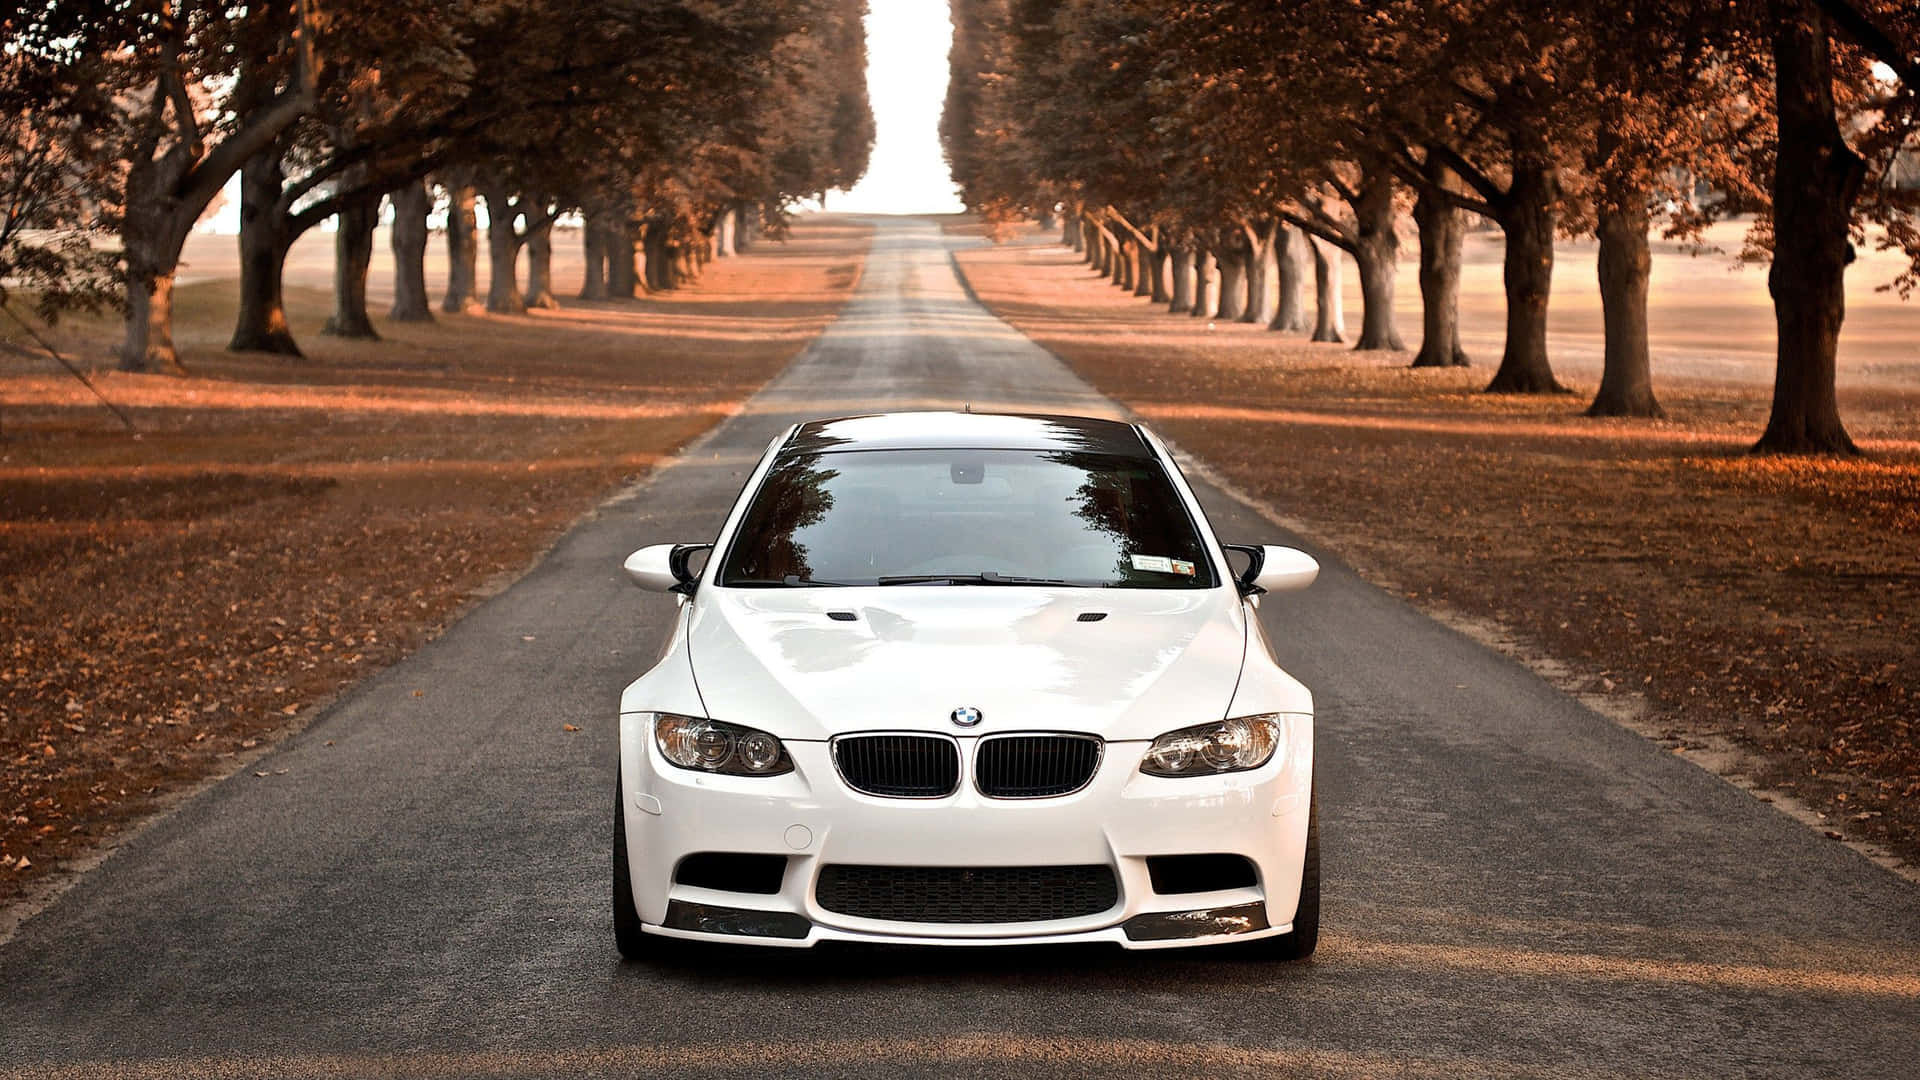 White Bmw Car On The Road Background